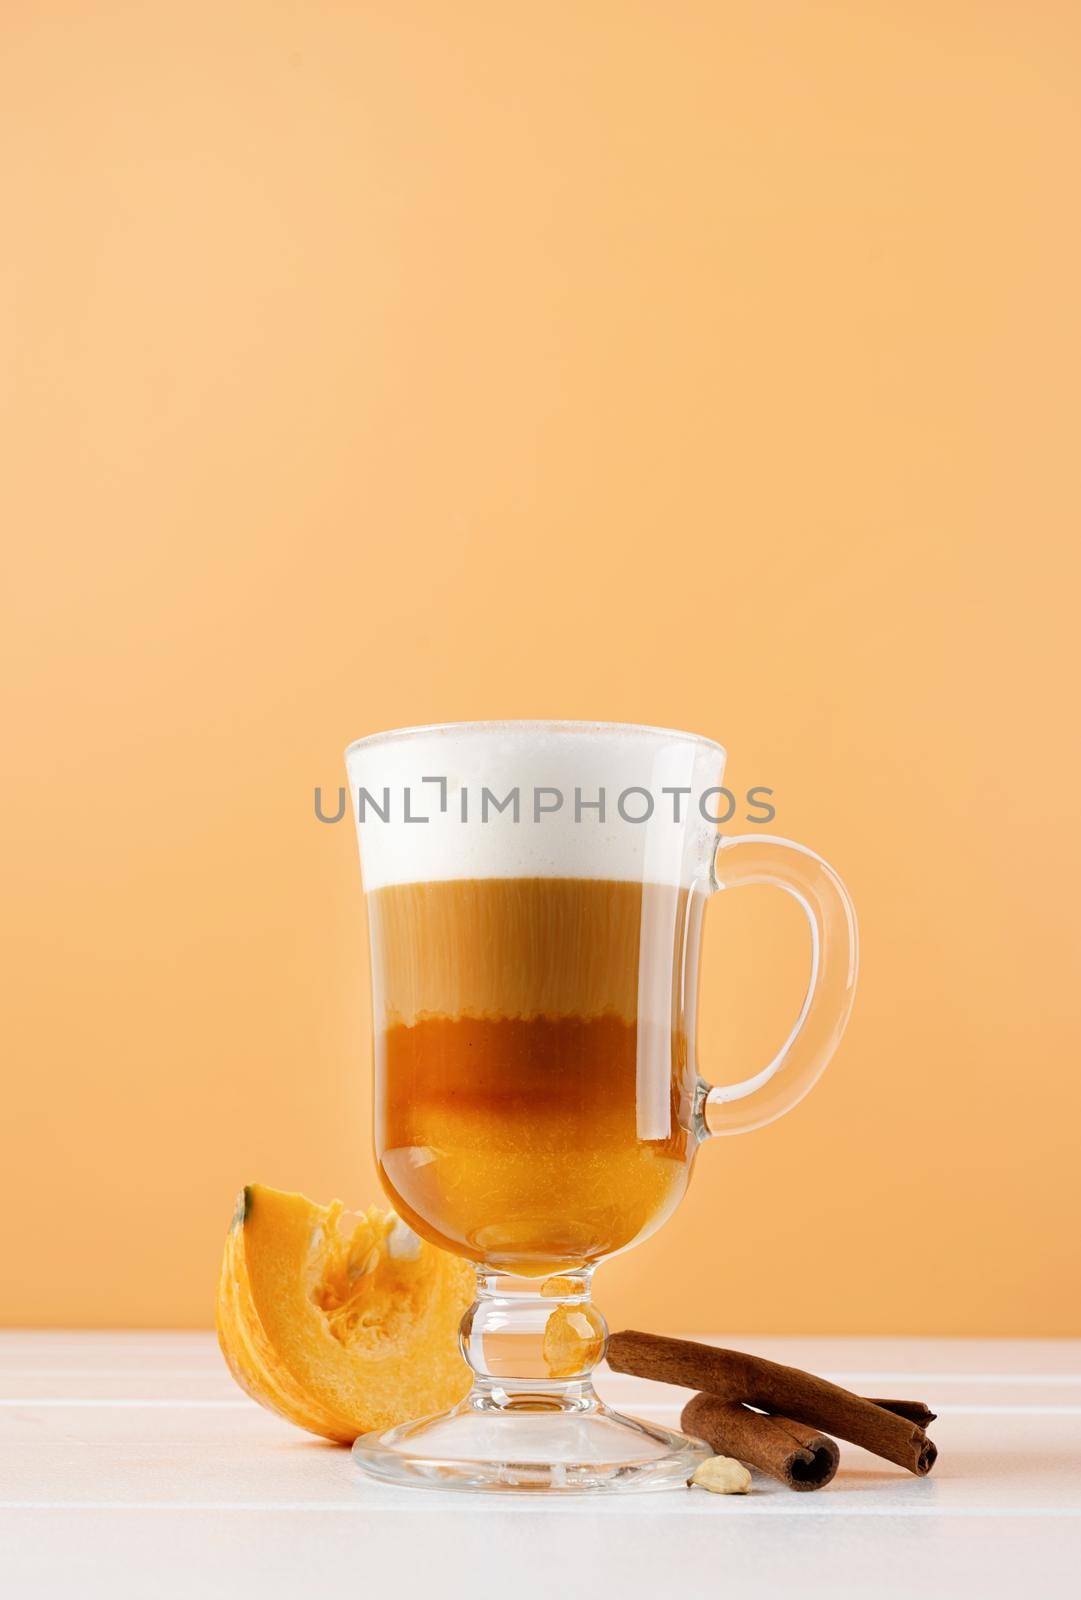 Autumn hot drinks. Pumpkin spice latte in a glass mug with cinnamon on orange background with copy space